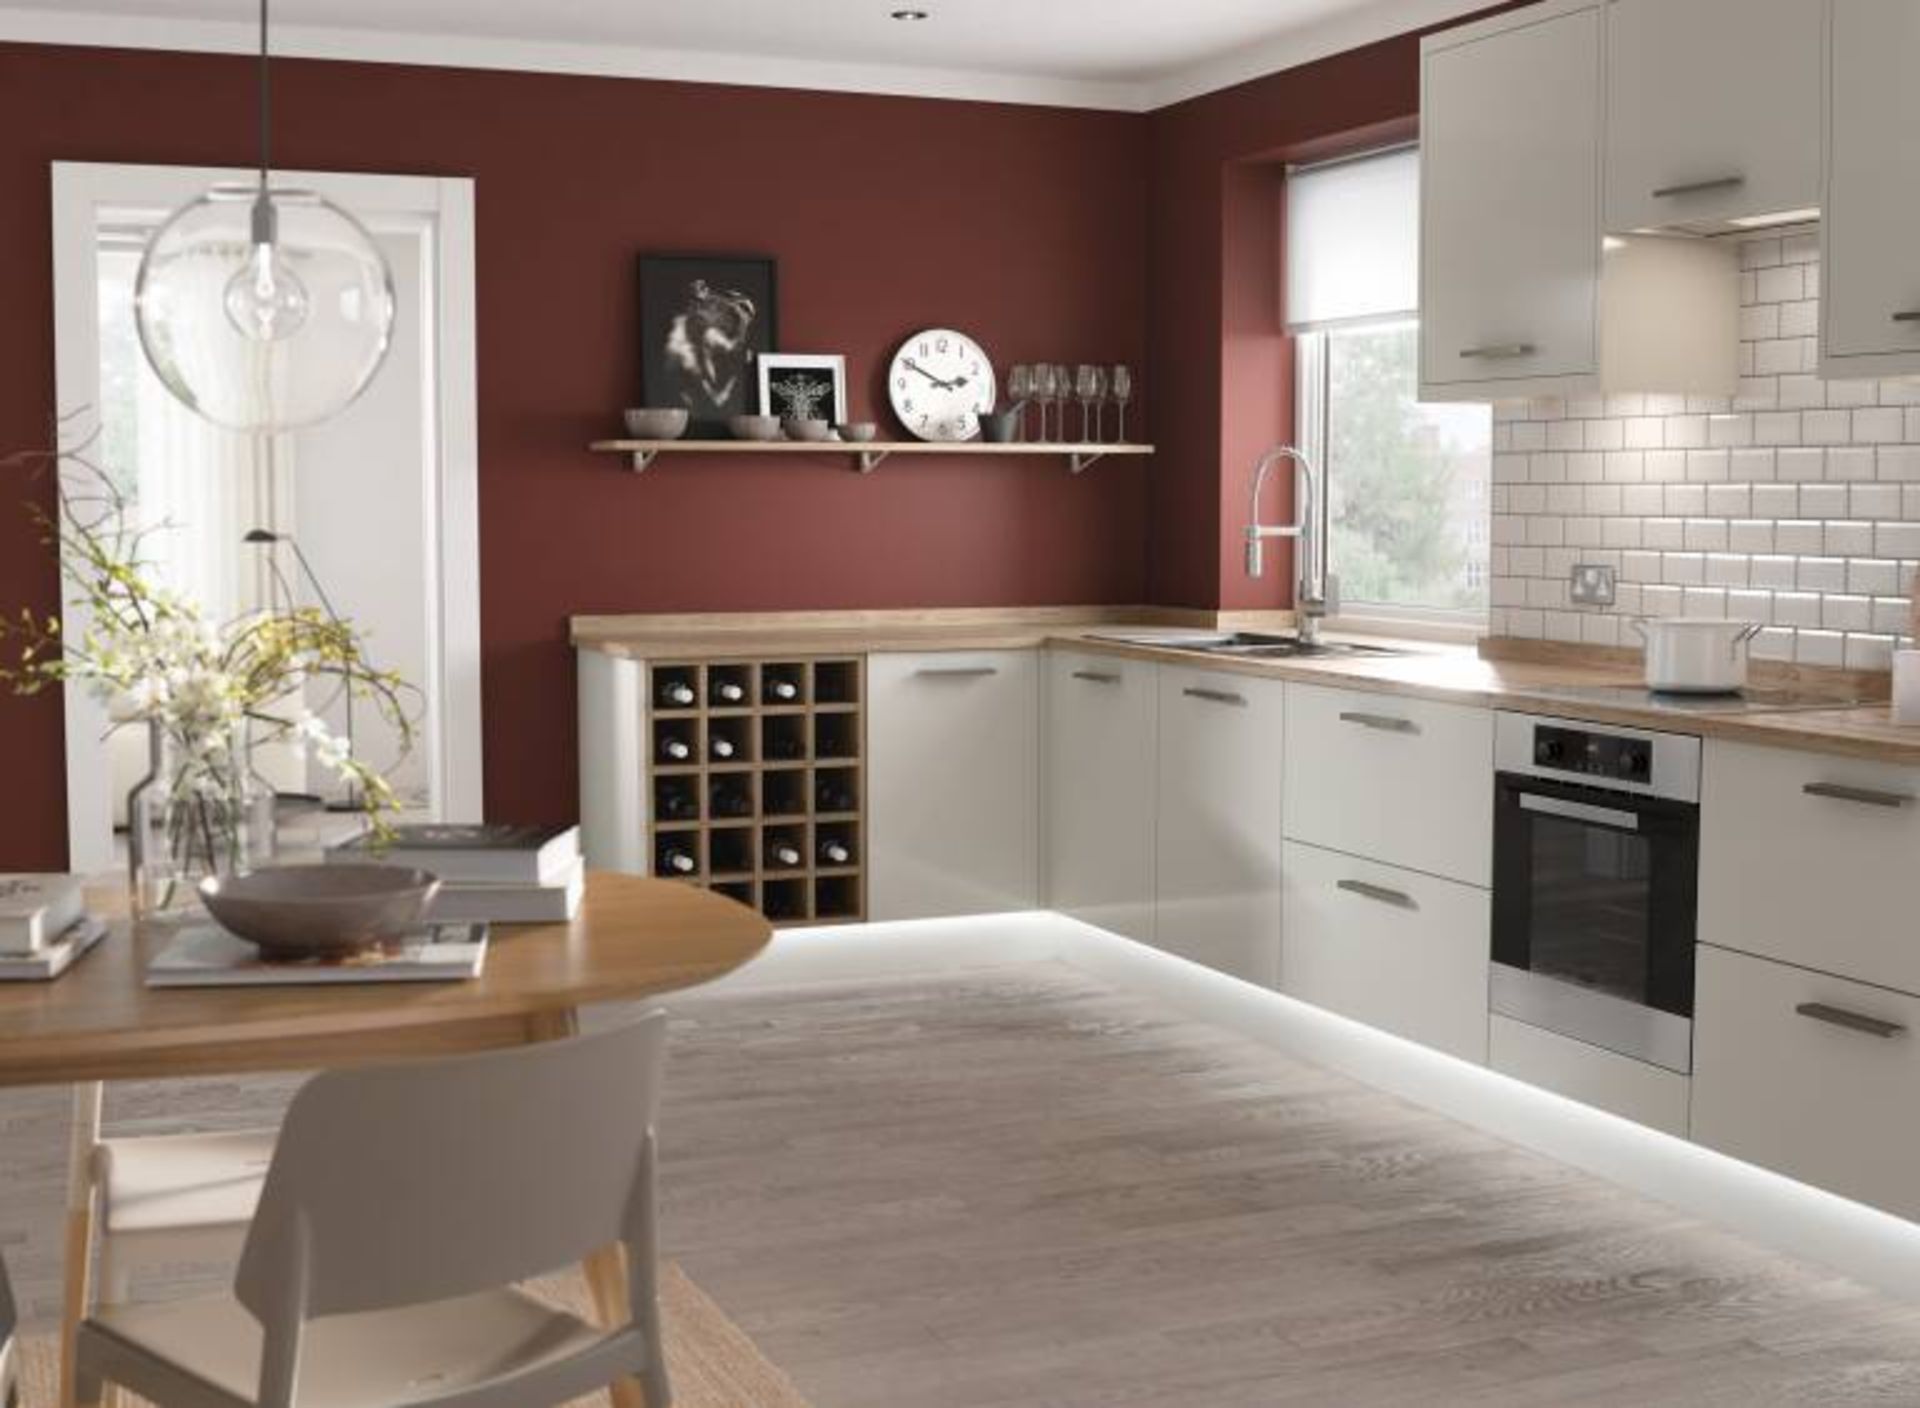 Circa 4,401 items of Kitchen Goods from the following ranges: Gloss White, Gloss Cream, Stonefield - Image 2 of 19